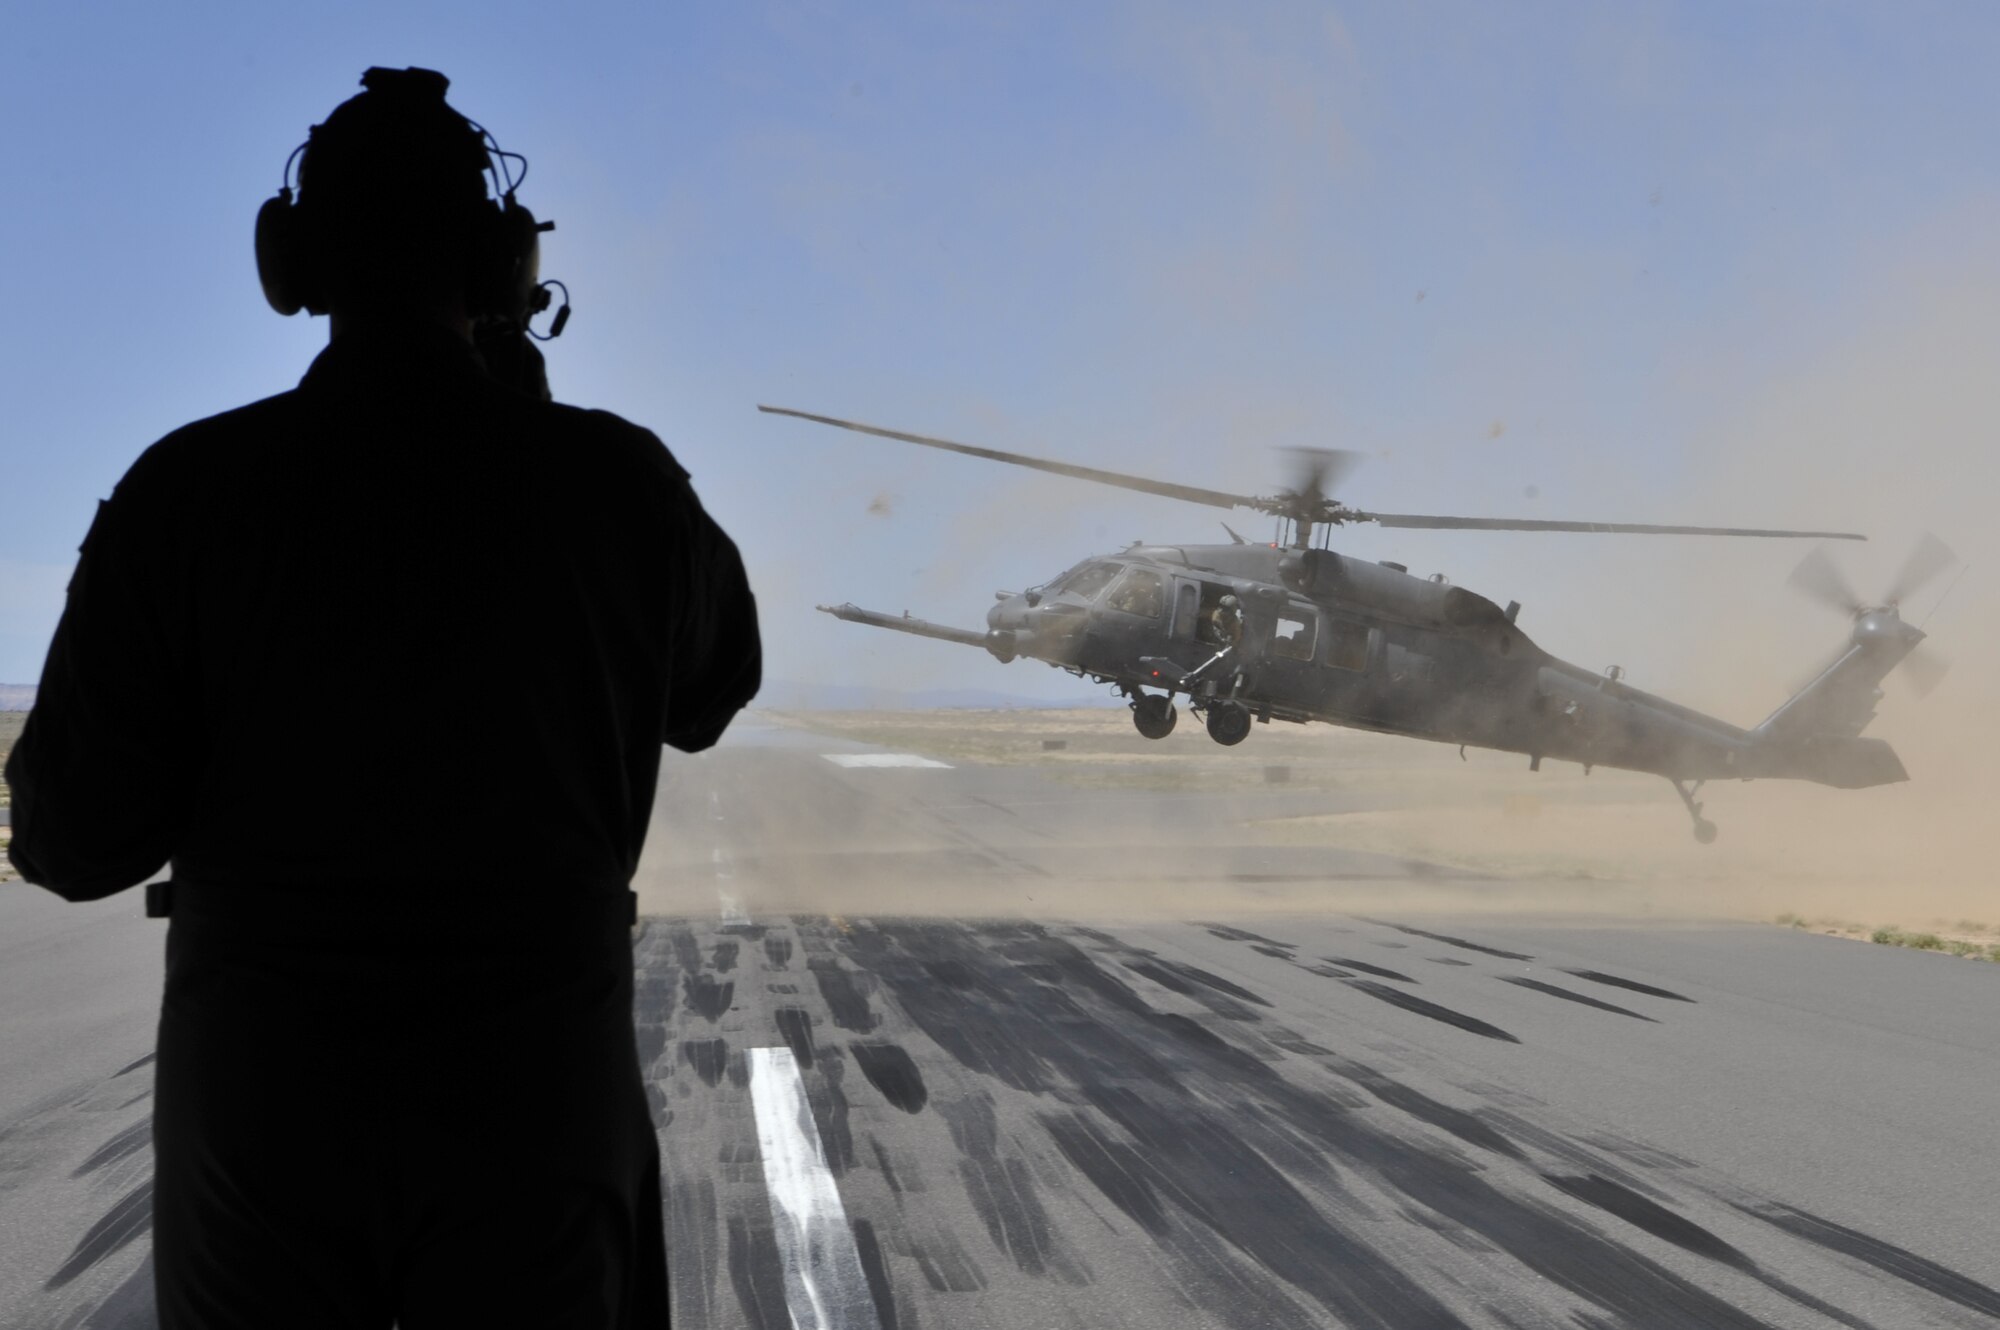 A loadmaster assigned to the 415th Special Operations Squadron, Kirtland Air Force Base, N.M., watches an HH-60G PAVE Hawk helicopter land during a training mission at Belen Alexander Airport, April 19, 2019, in Belen, N.M. The 415th SOS mission is to train special operations aircrew for the MC-130J Commando II and HC-130J Combat King II. (U.S. Air Force photo by Staff Sgt. Dylan Nuckolls/Released)